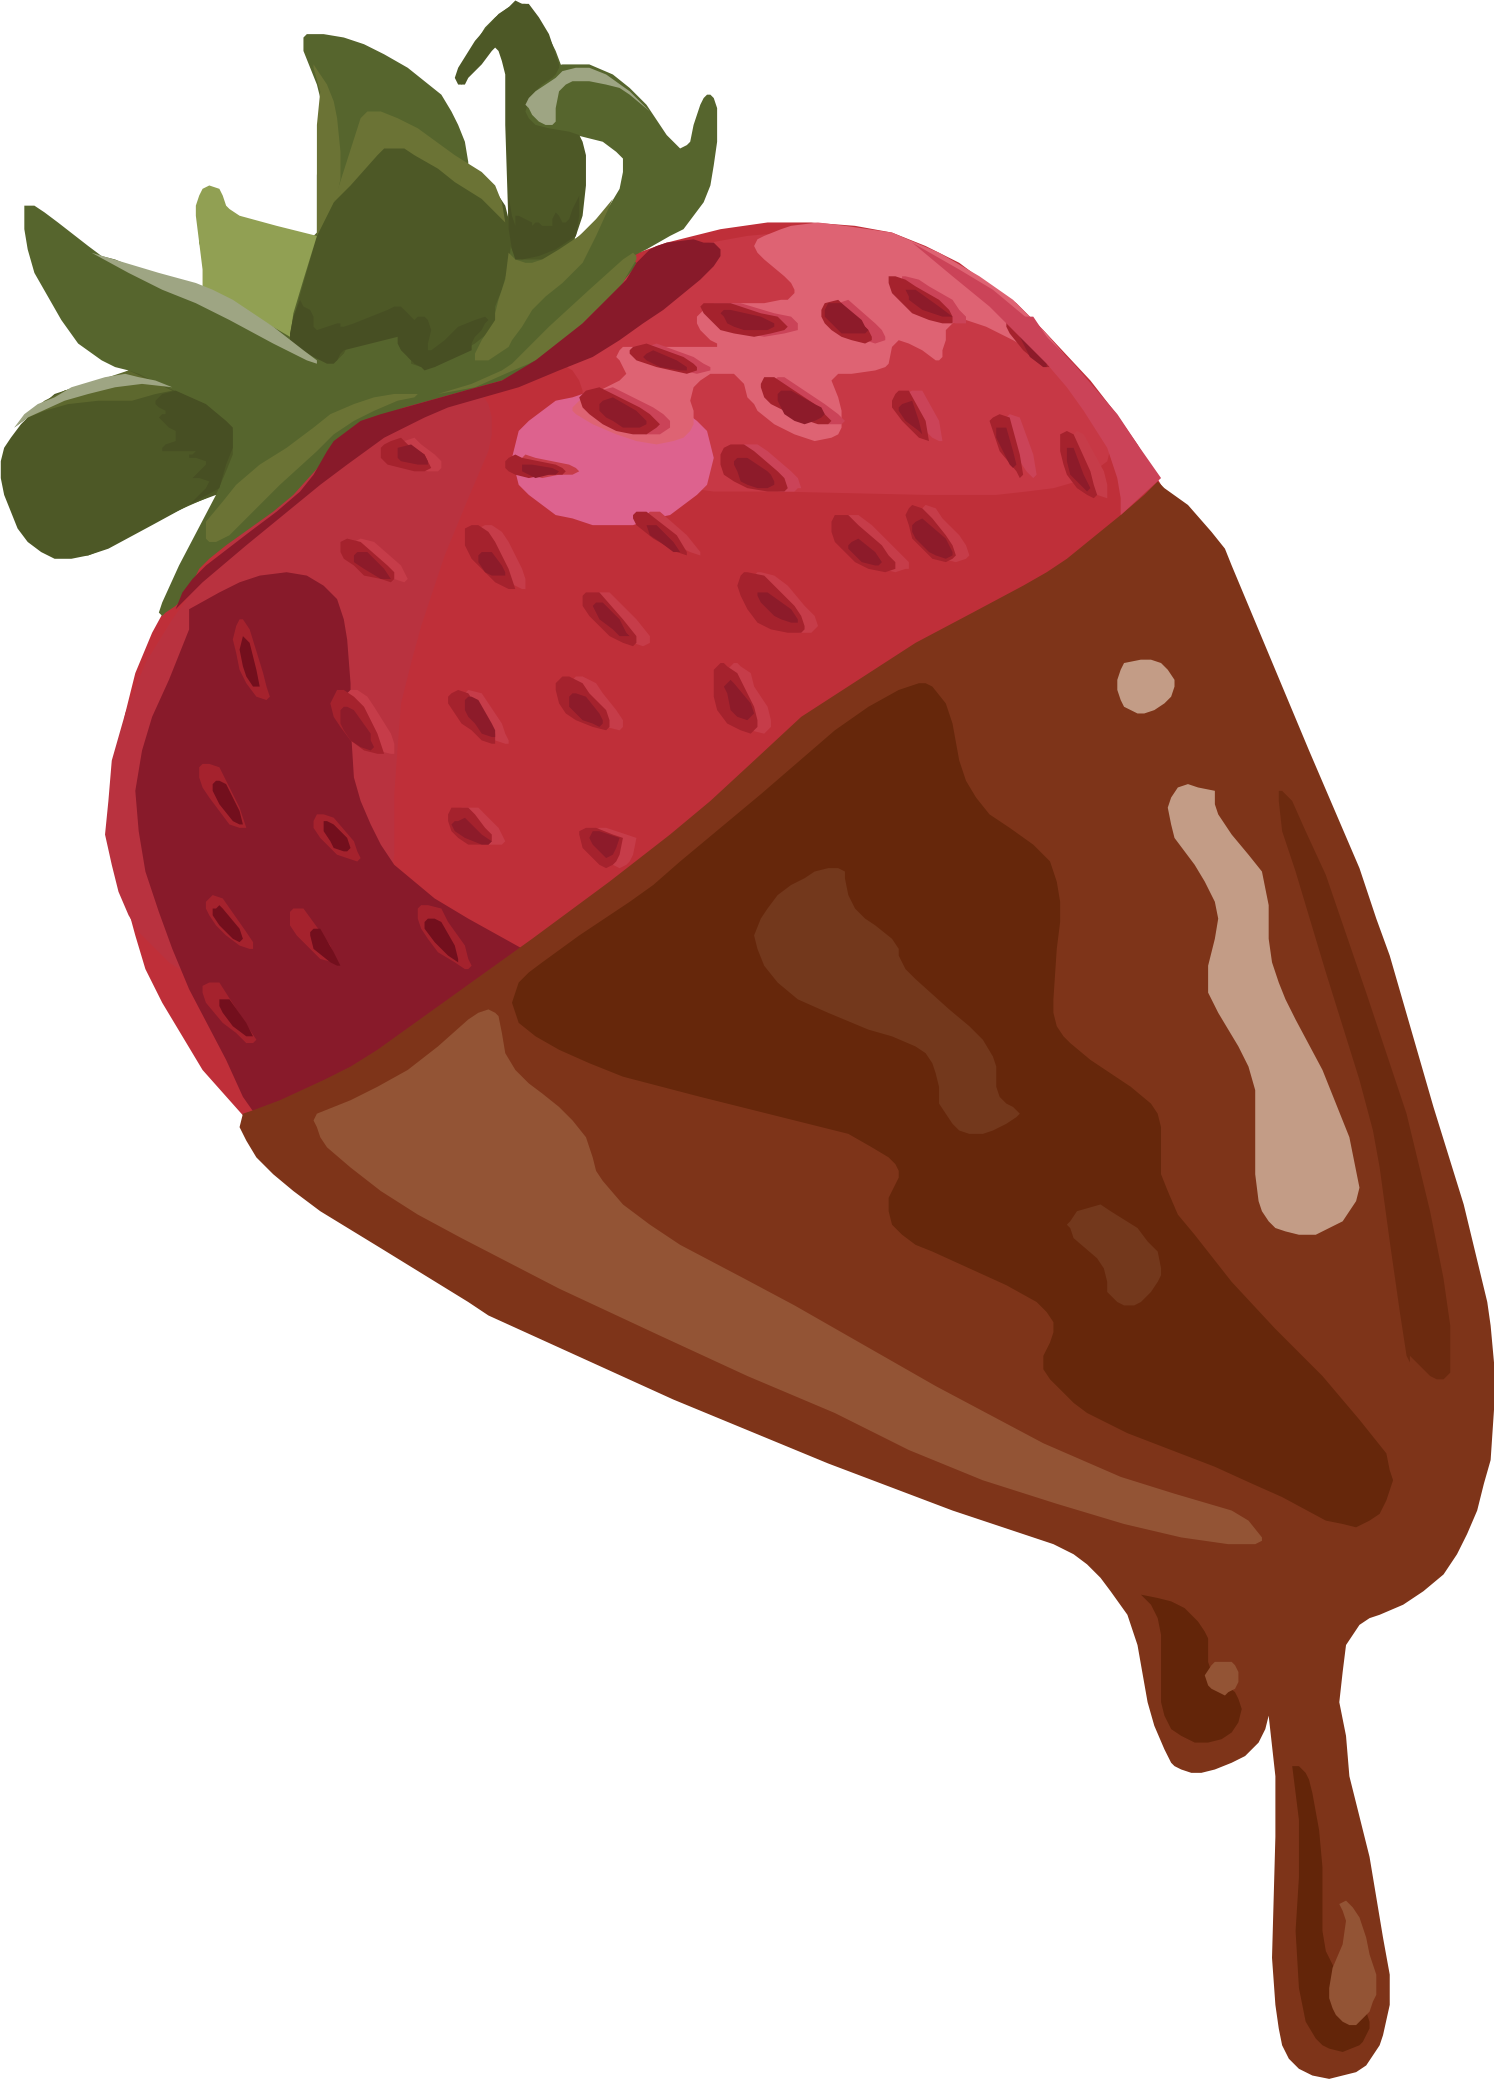 Strawberry Dipped In Chocolate - Chocolate (1494x2079)